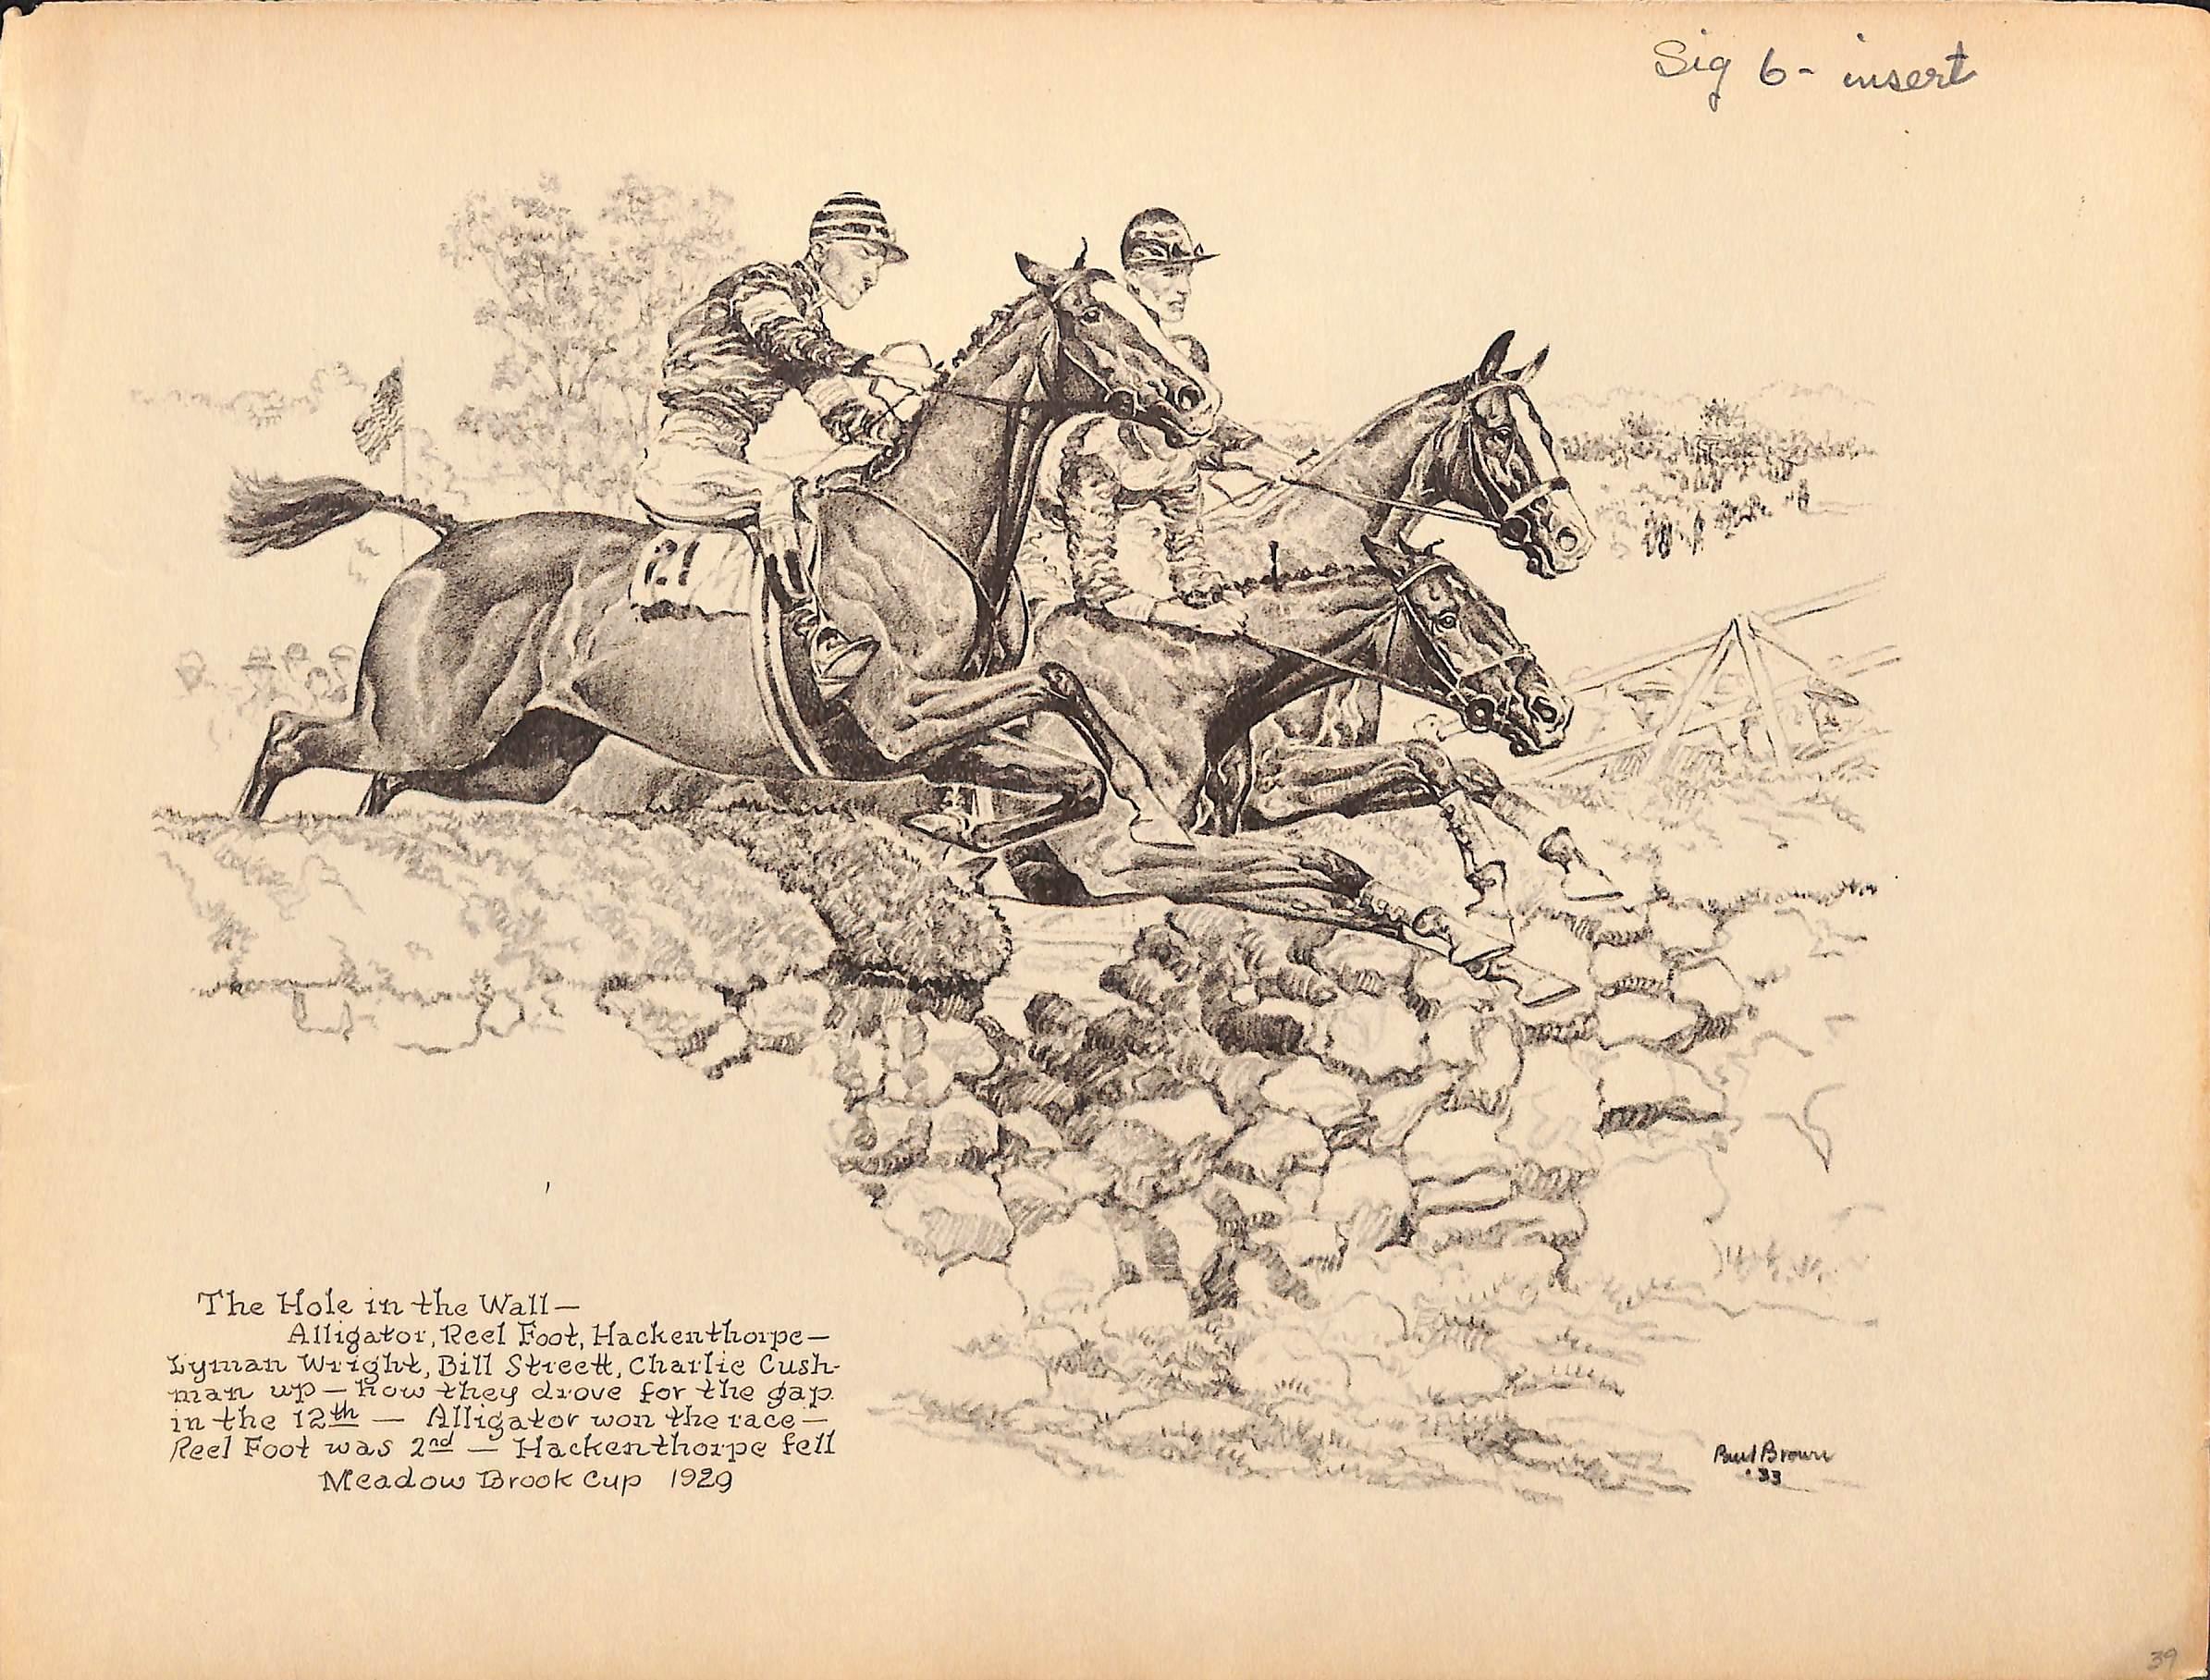 The Hole In The Wall Meadow Brook Cup 1929 - Art by Paul Desmond Brown